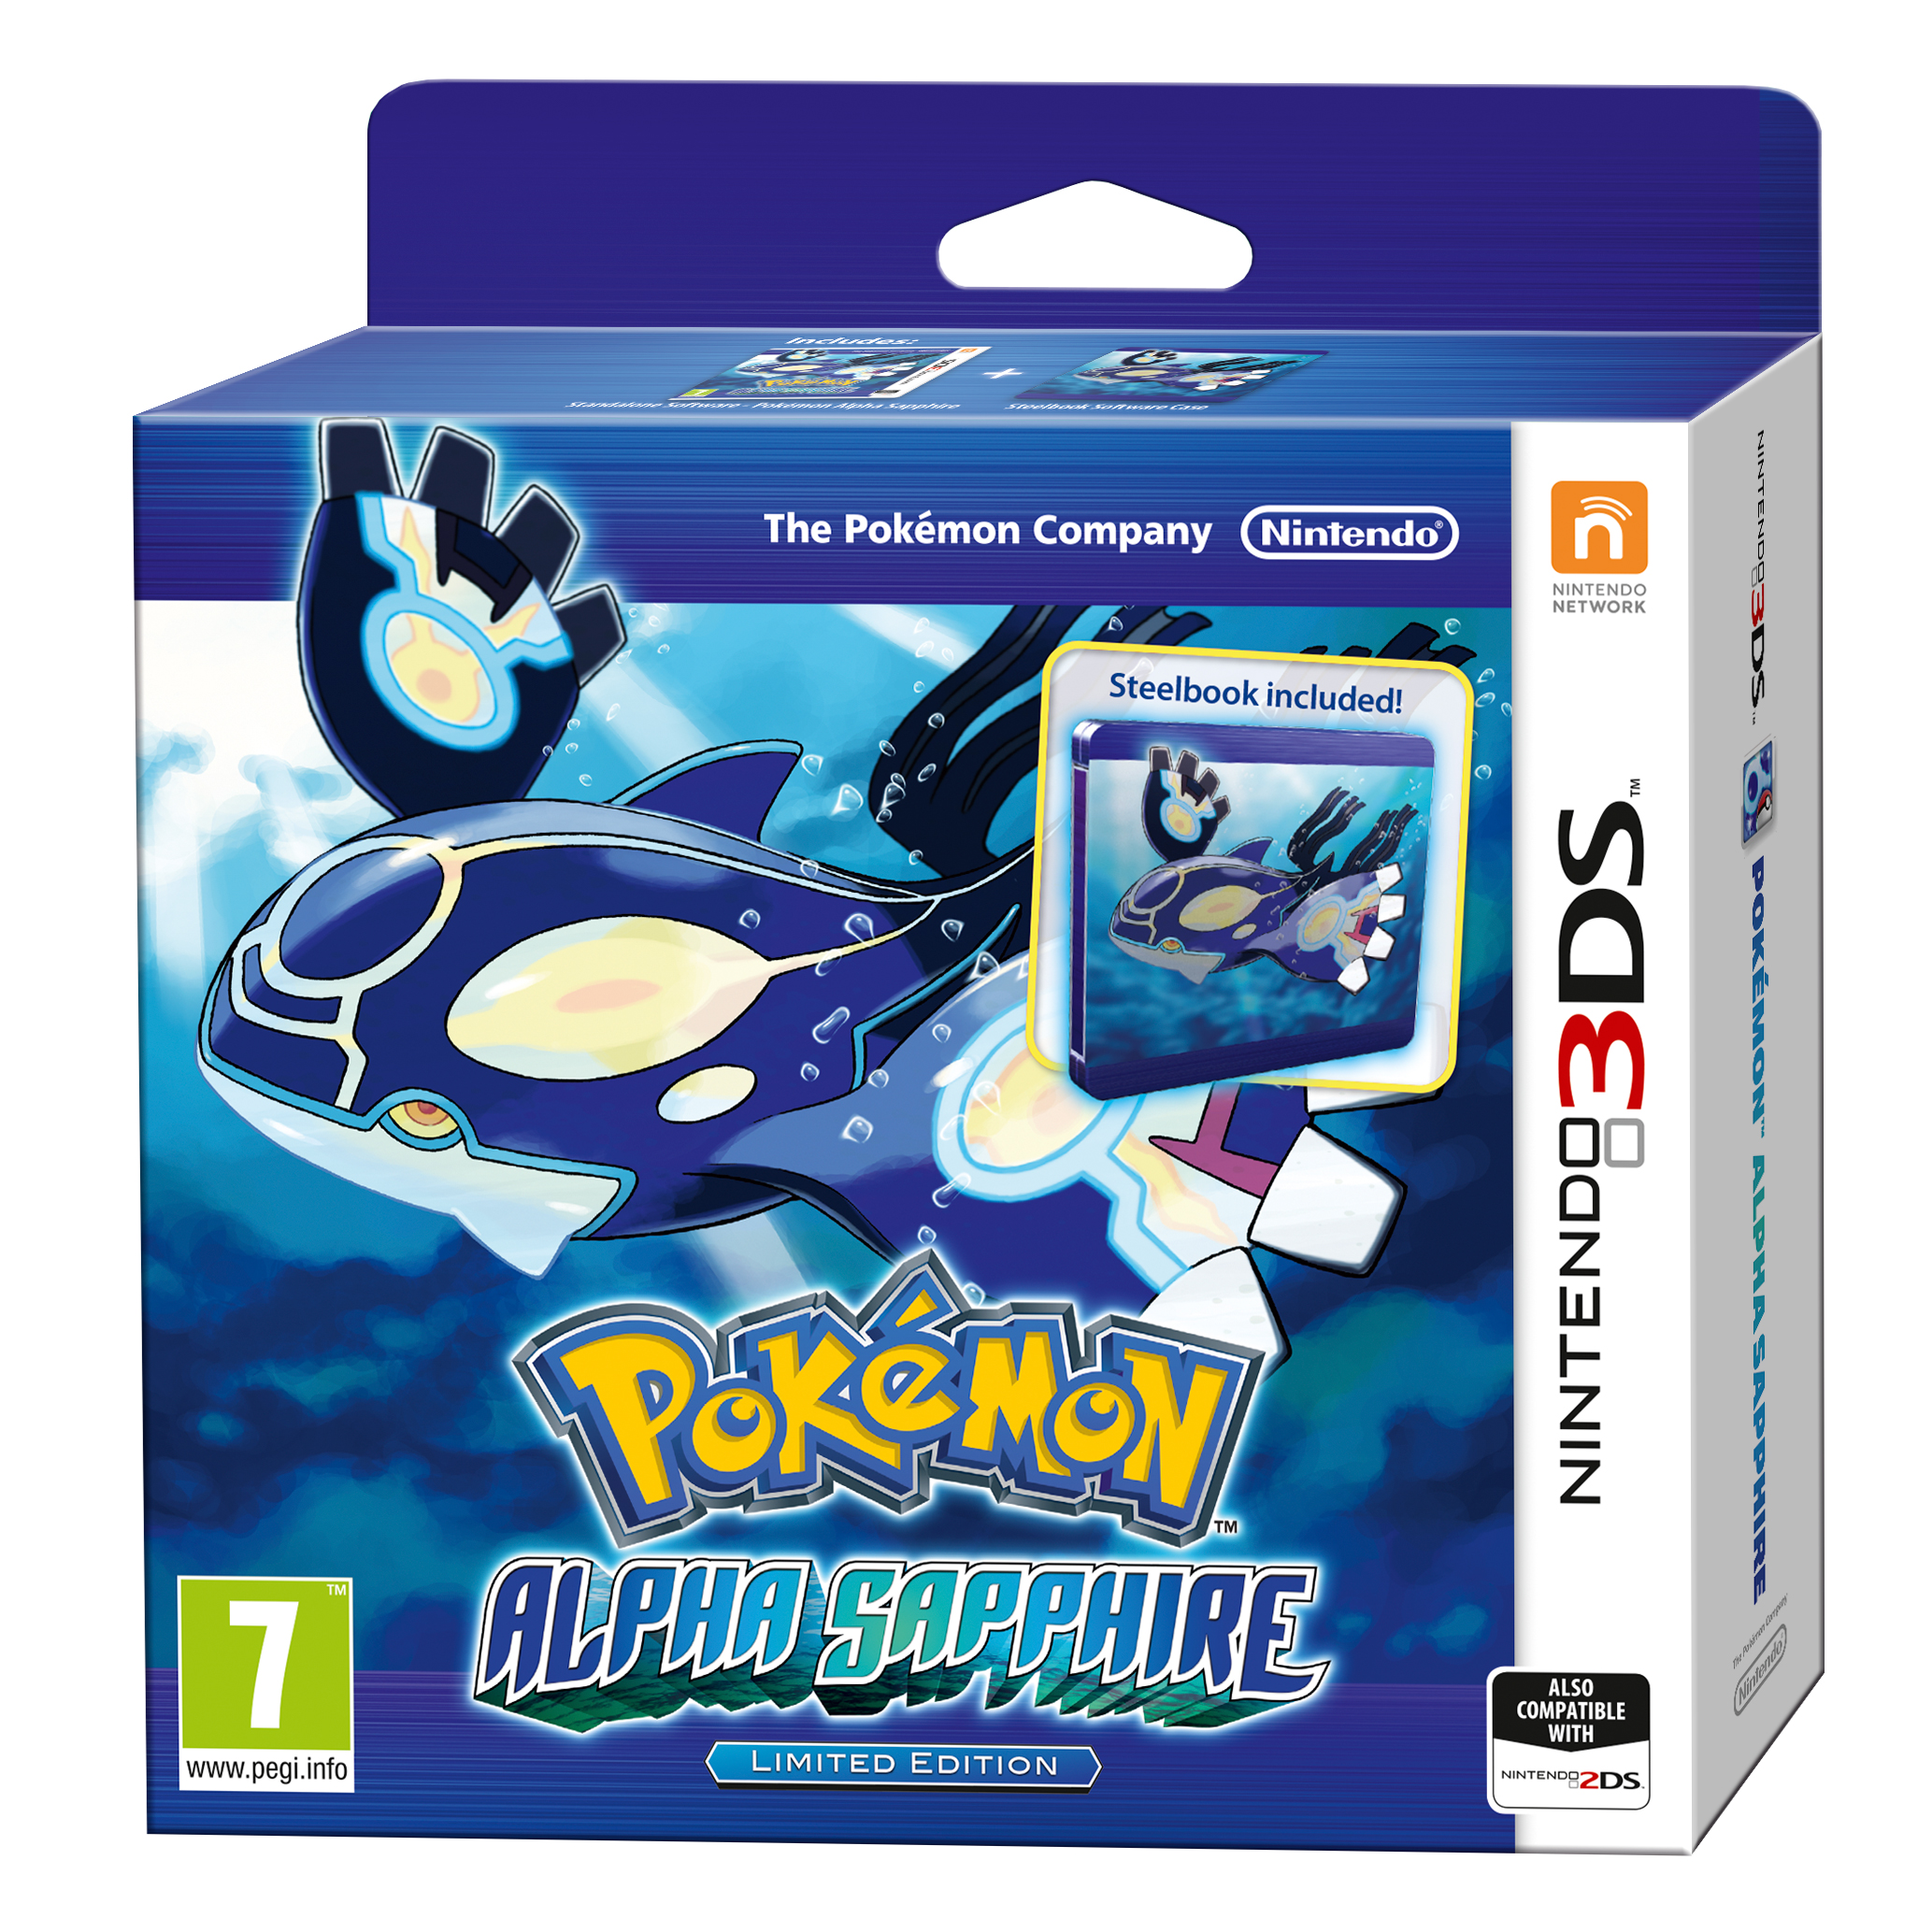 Tricks of Pokemon Rubi Omega and Alpha Sapphire for 3DS